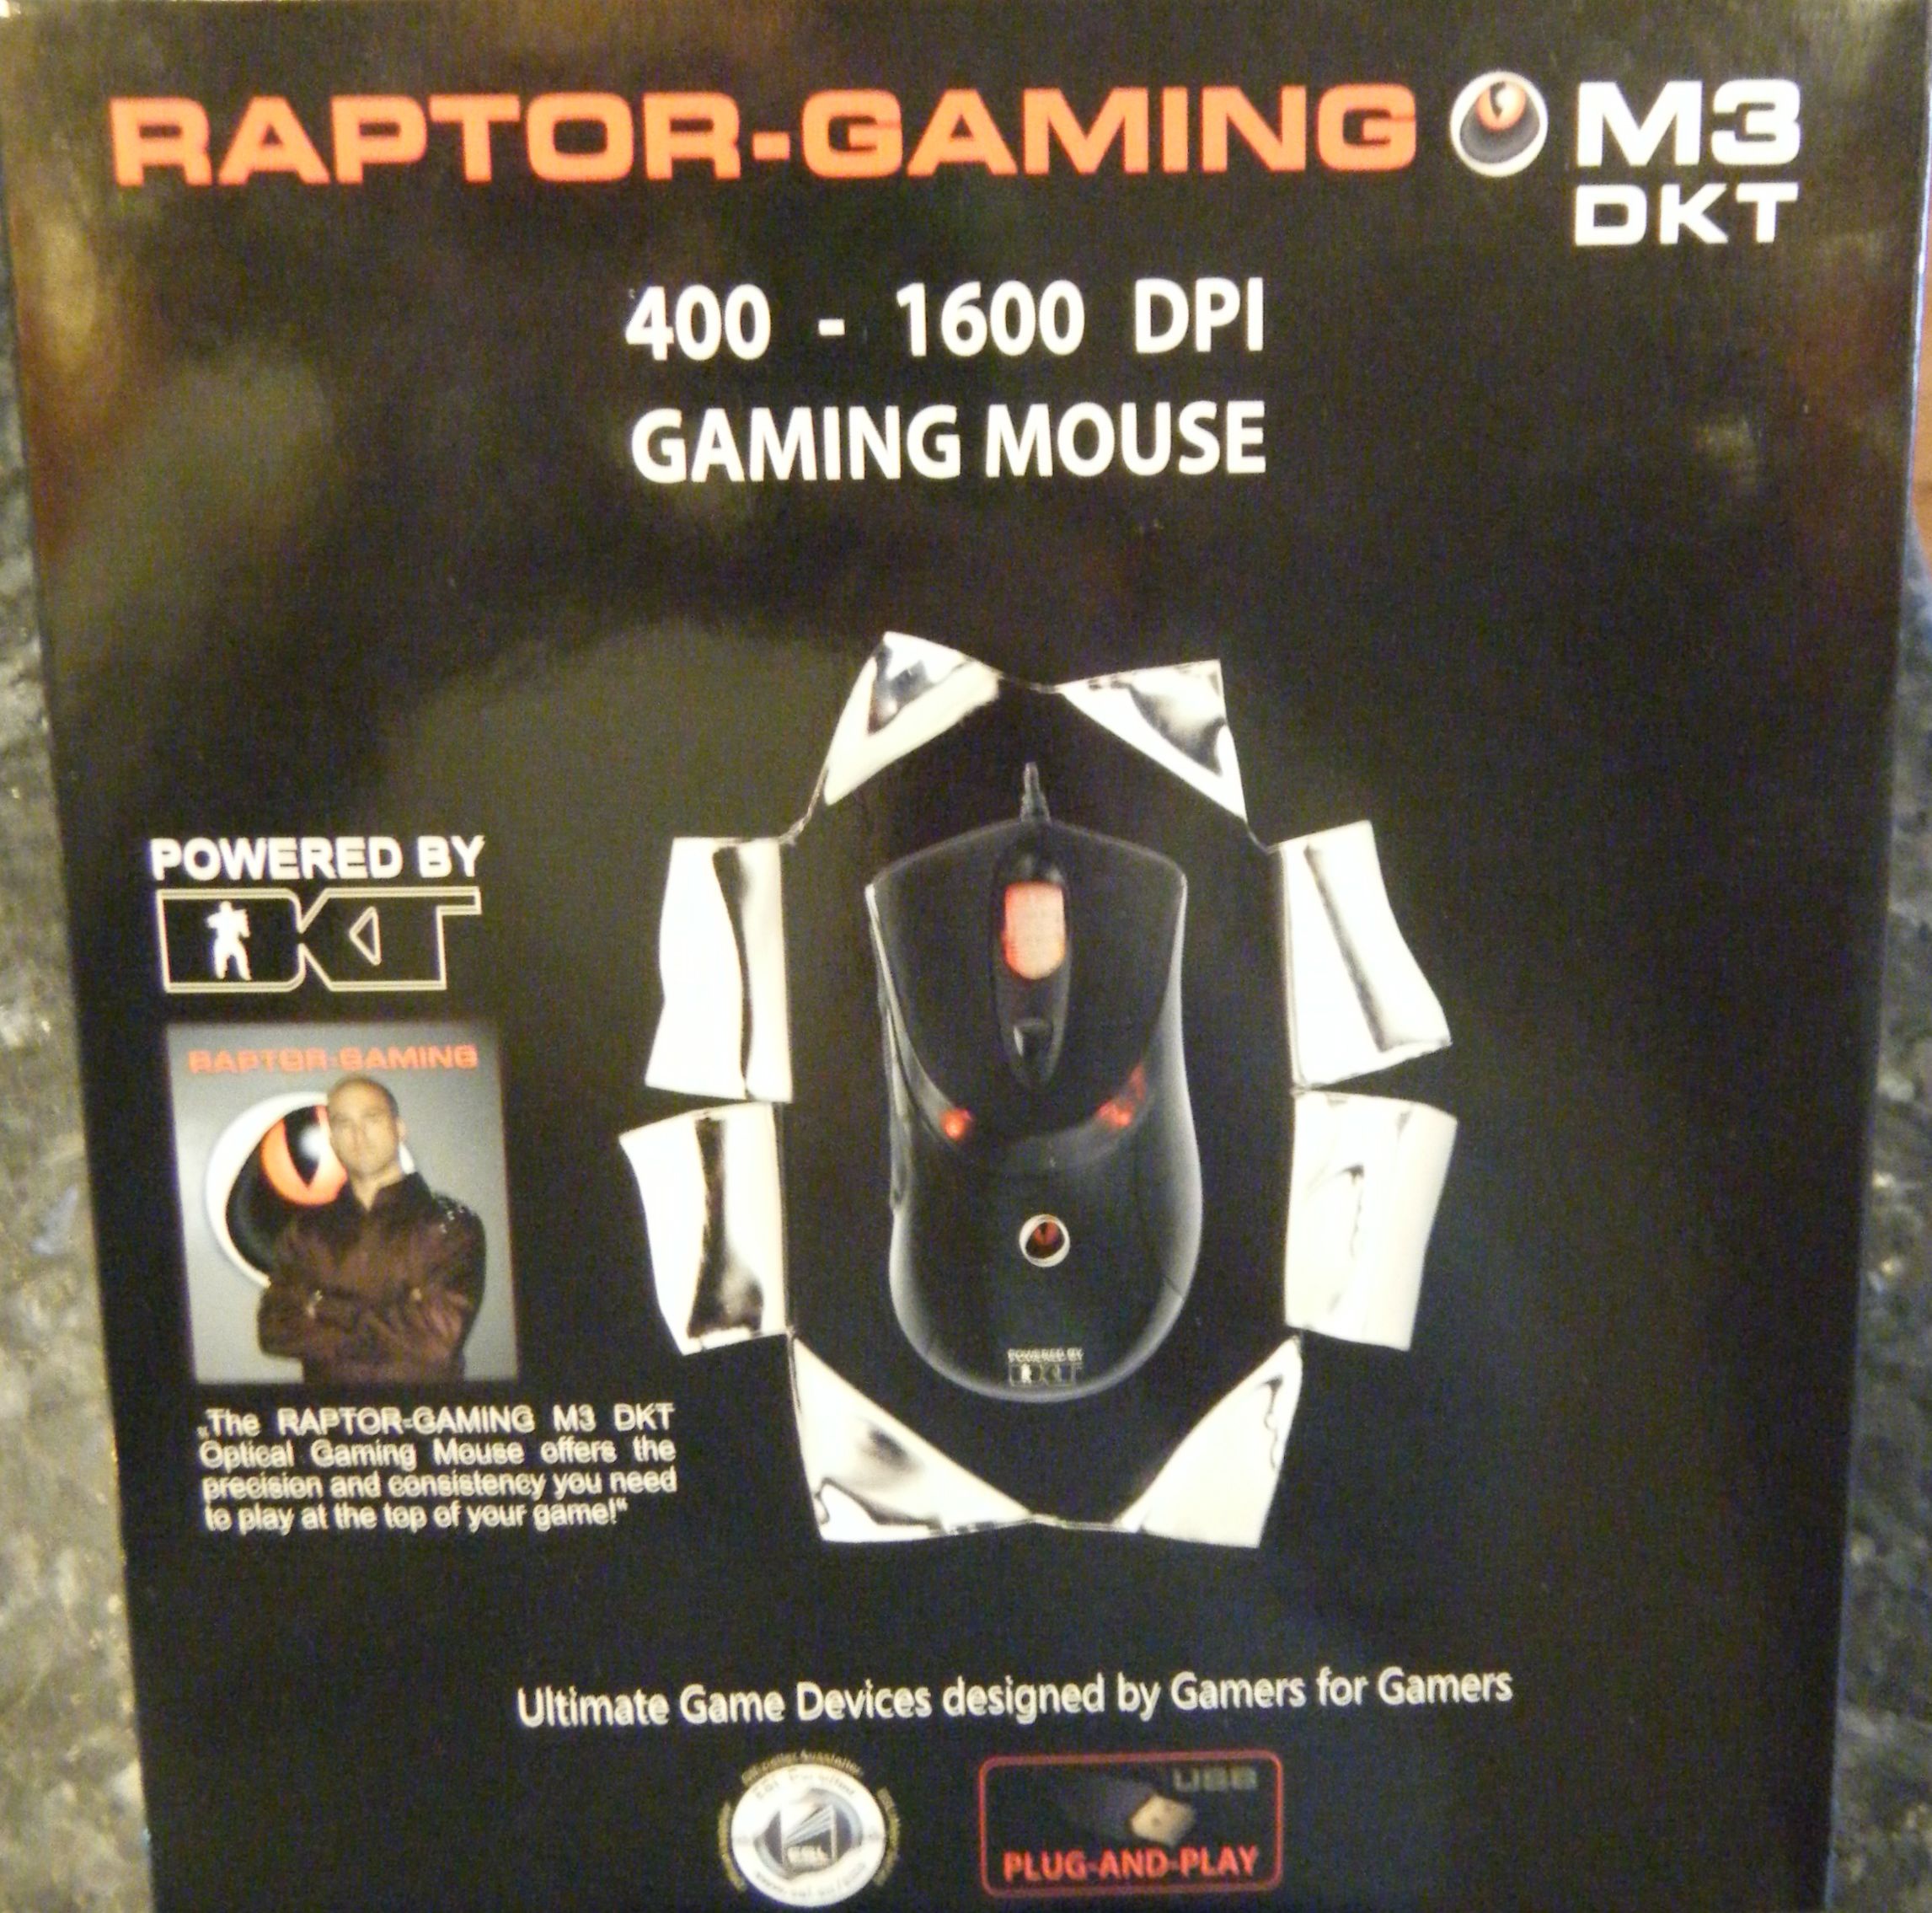 Raptor M3 DKT Gaming Mouse Offers High Precision at a Great Price